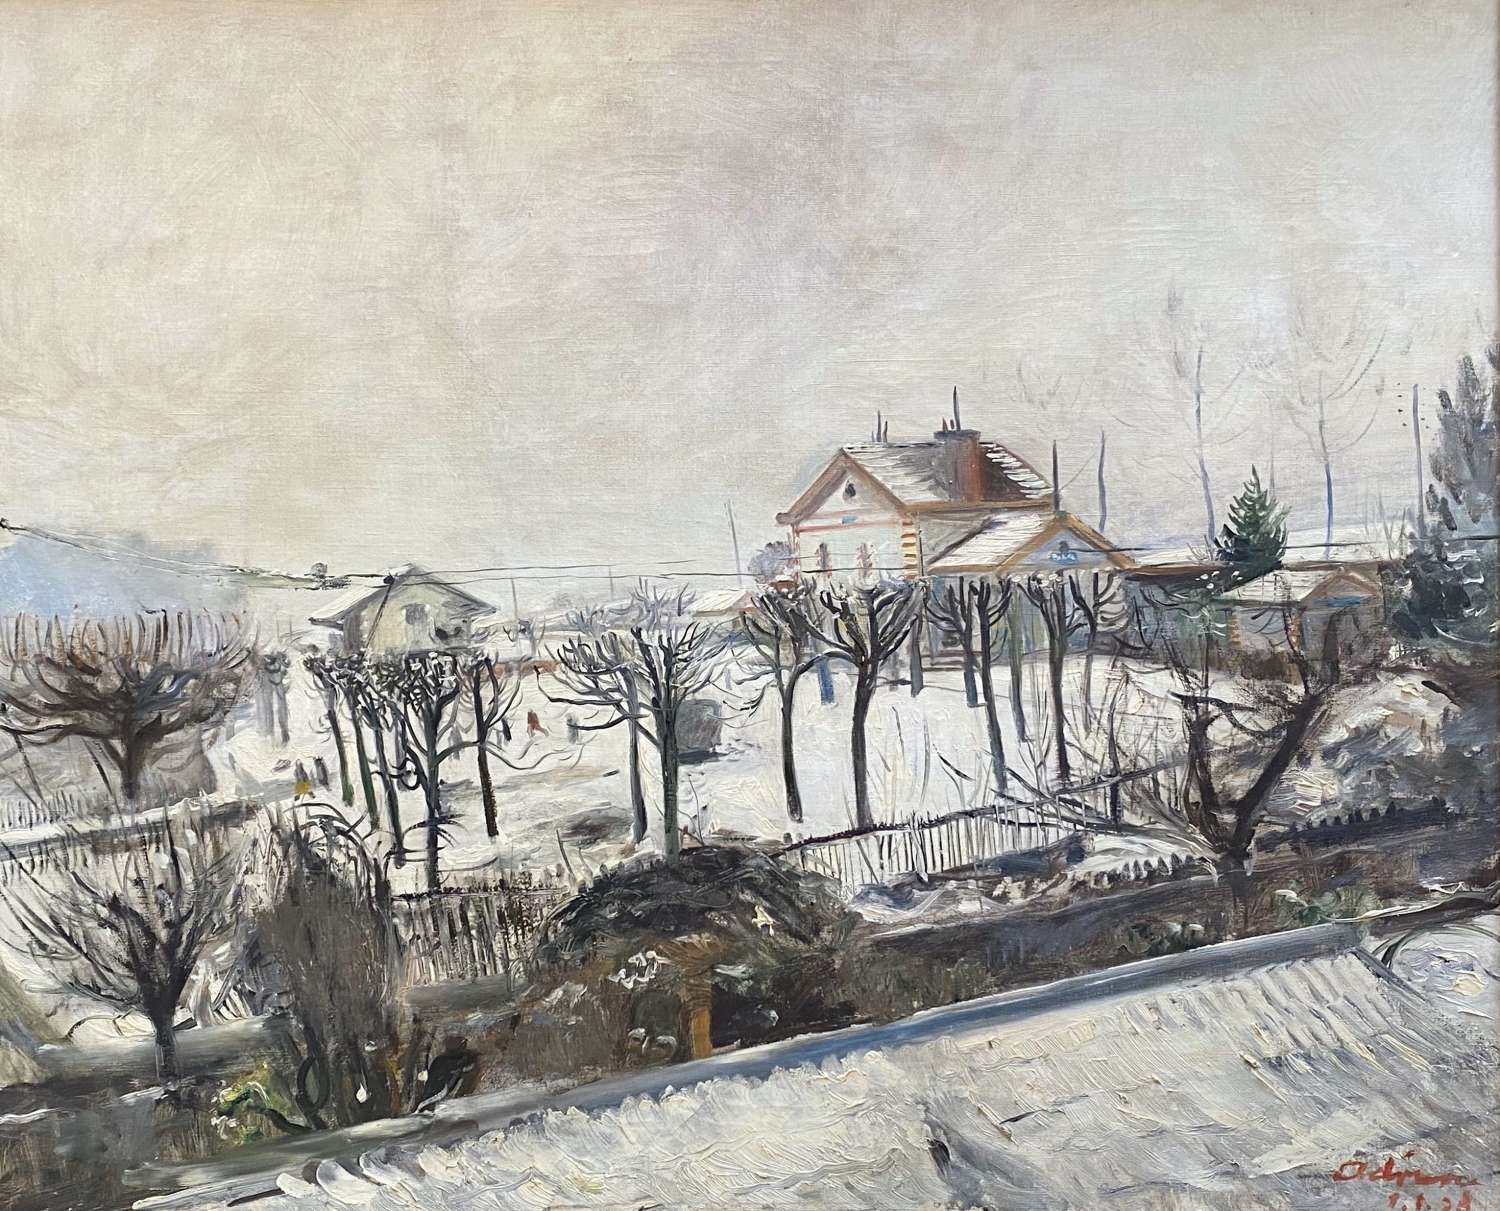 Lucien Adrion: Snow In The Suburbs, New Year's Day 1928